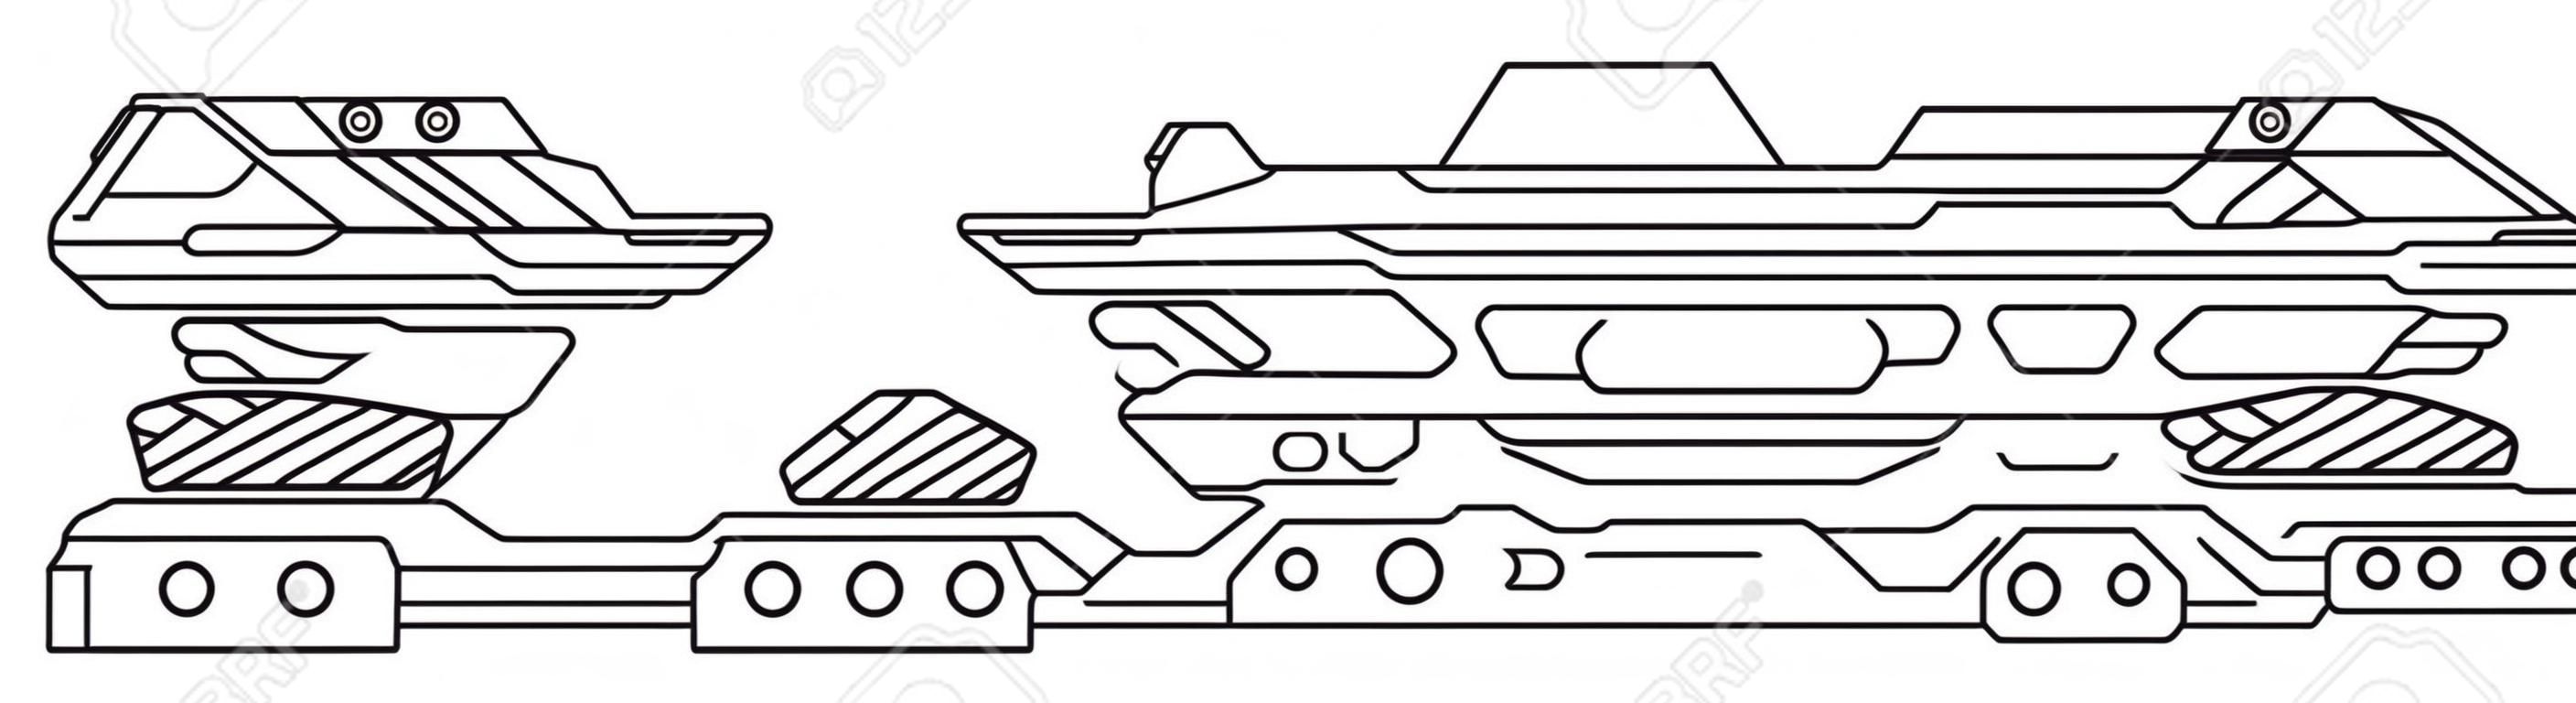 Futuristic outer space battle starship. UFO (unidentified flying object) aliens. Detailed vector illustration